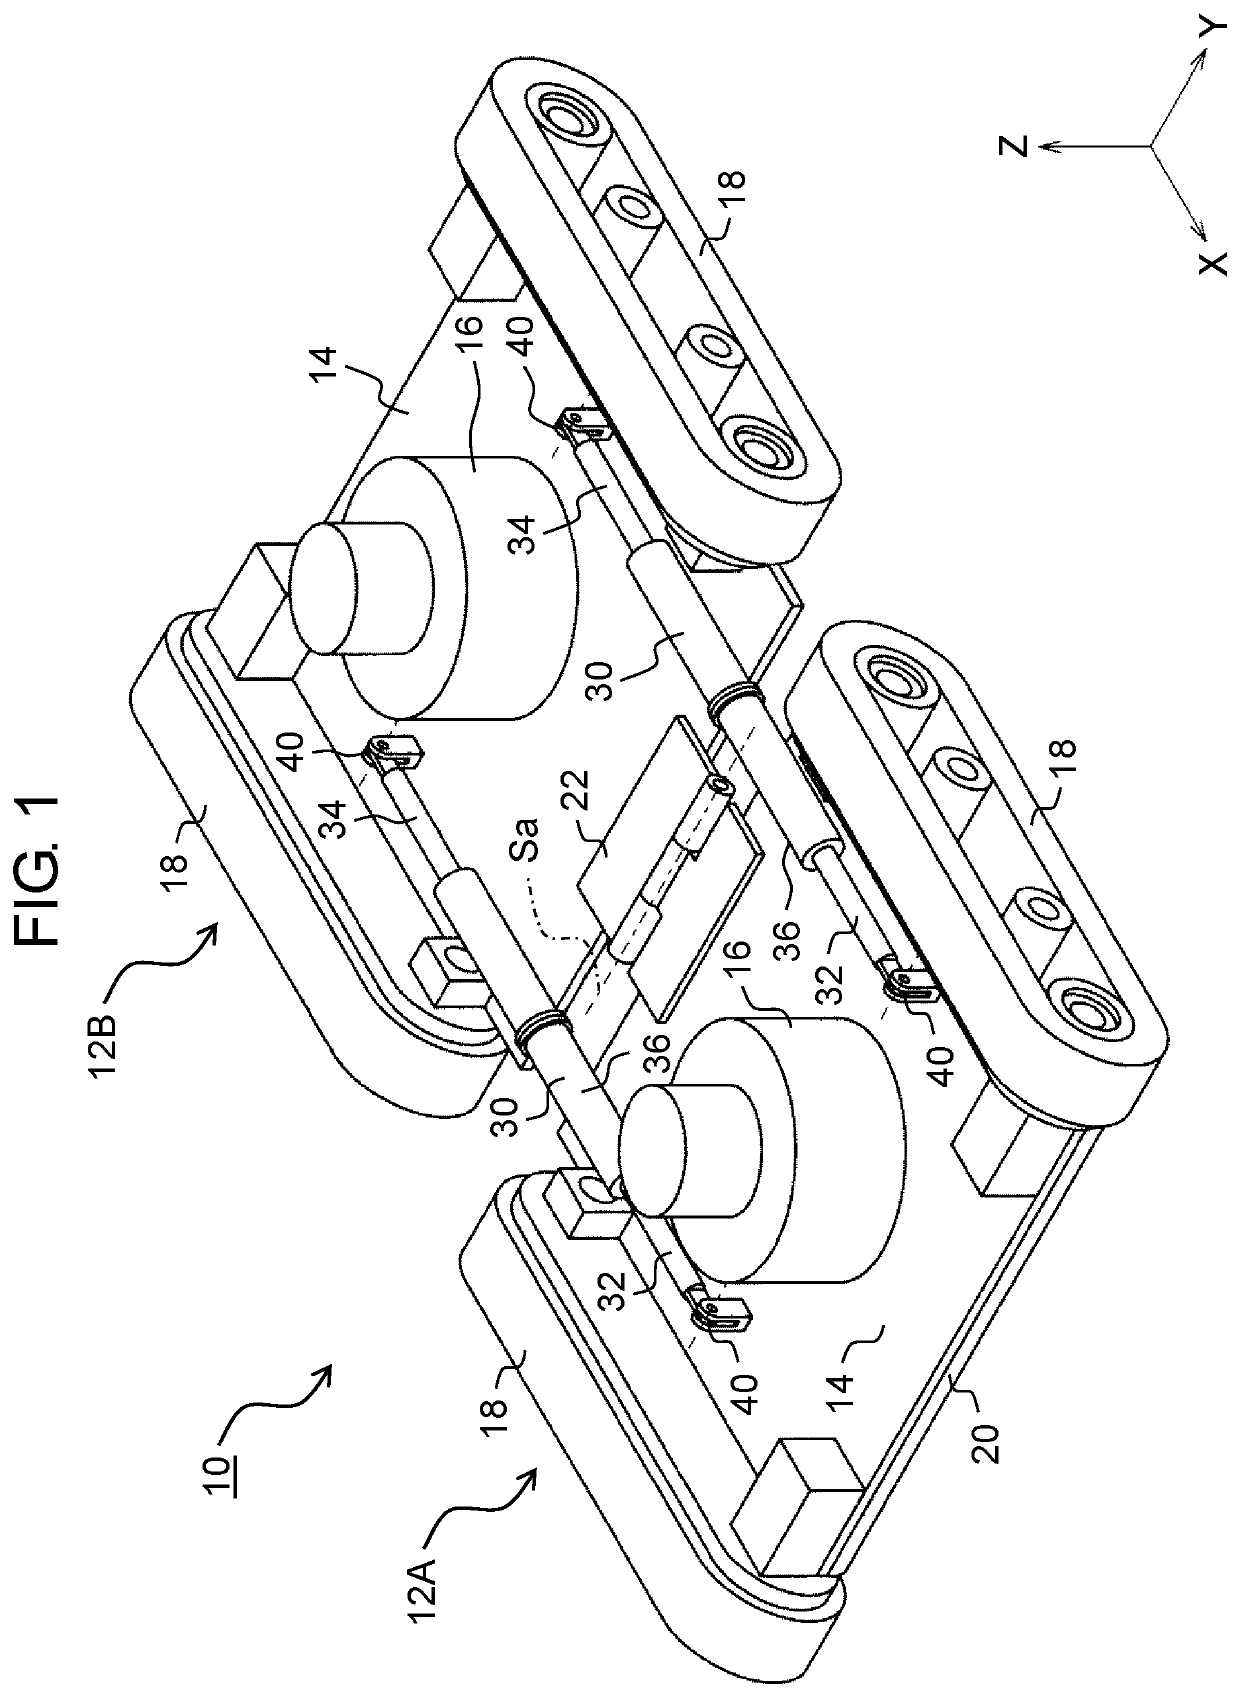 Wall surface suction traveling device